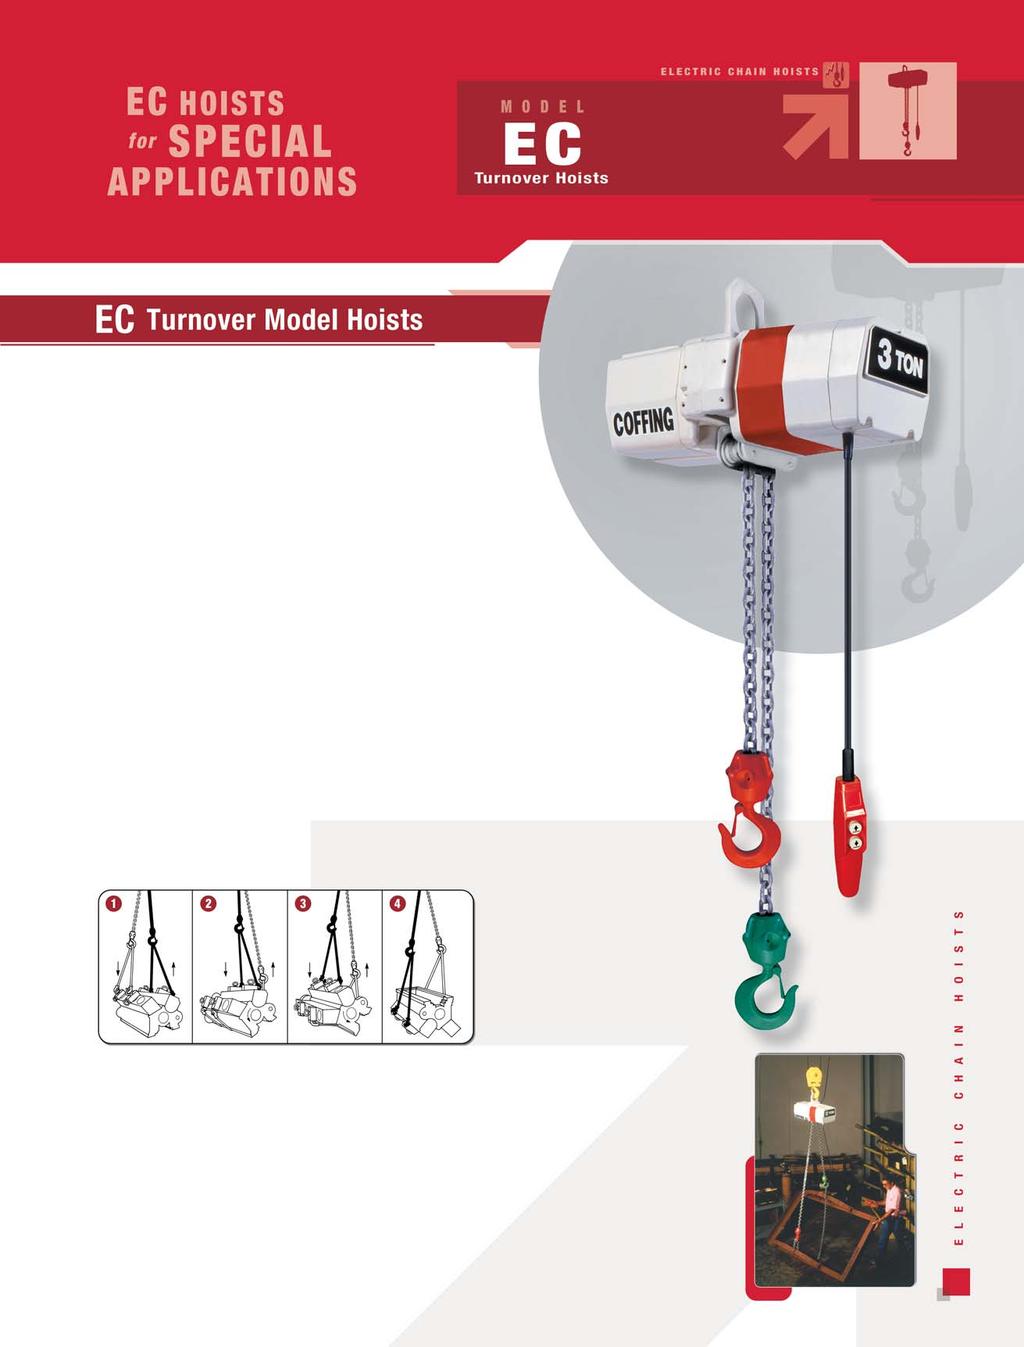 COFFING EC Turnover Models - Specially modified EC Hoist designed for machining, assembly, or repair applications which require complete rotation and/or precise positioning of large, non-symmetrical